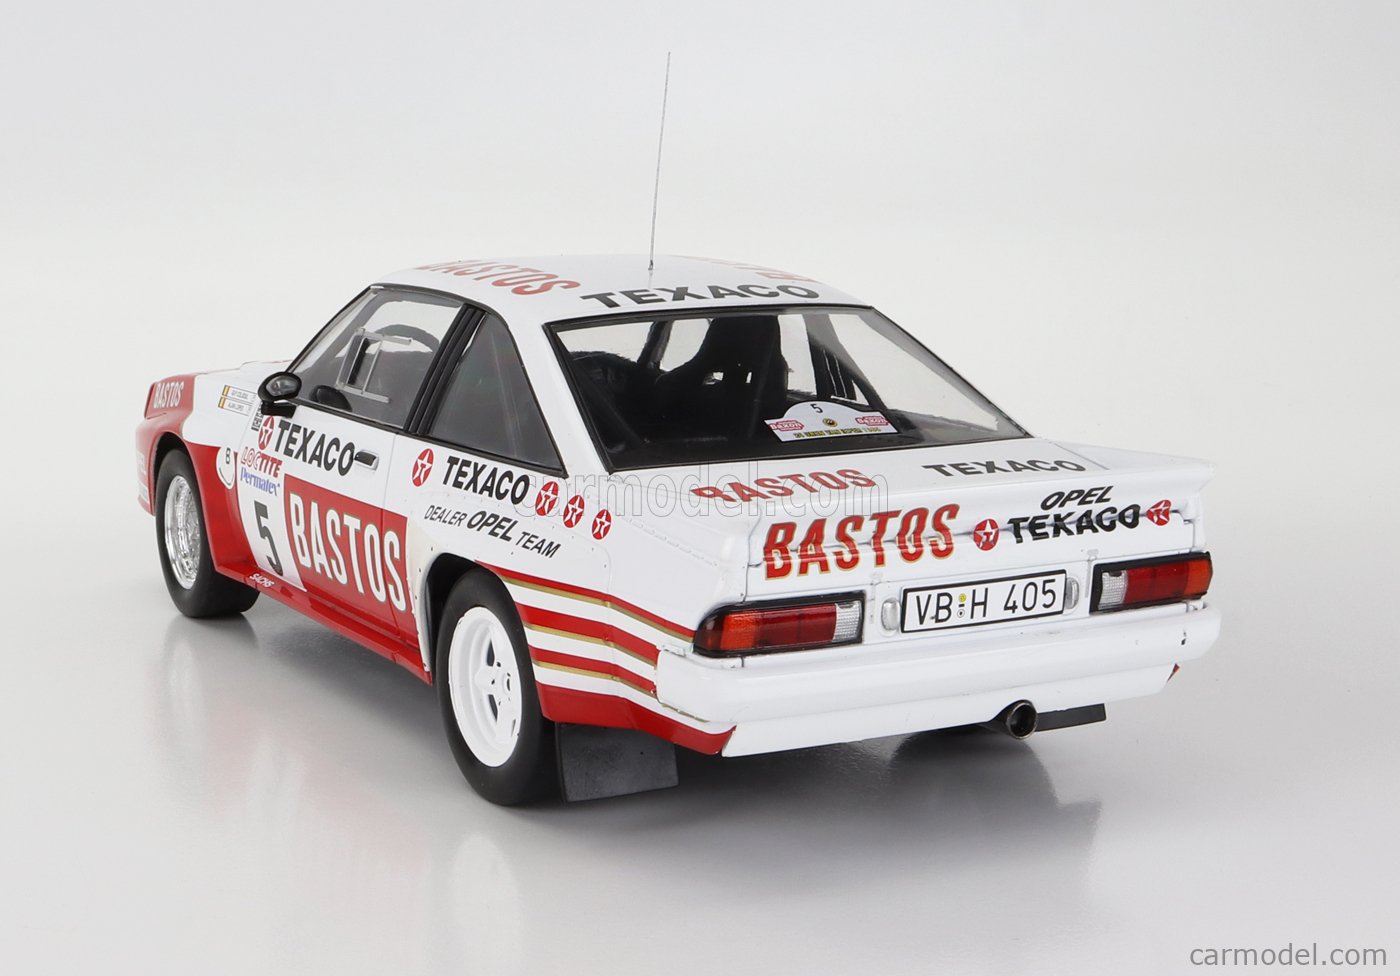 IXO-MODELS 18RMC134.22 Echelle 1/18  OPEL MANTA 400 BASTOS N 5 RALLY YPRES 1985 G.COLSOUL - A.LOPES WHITE RED